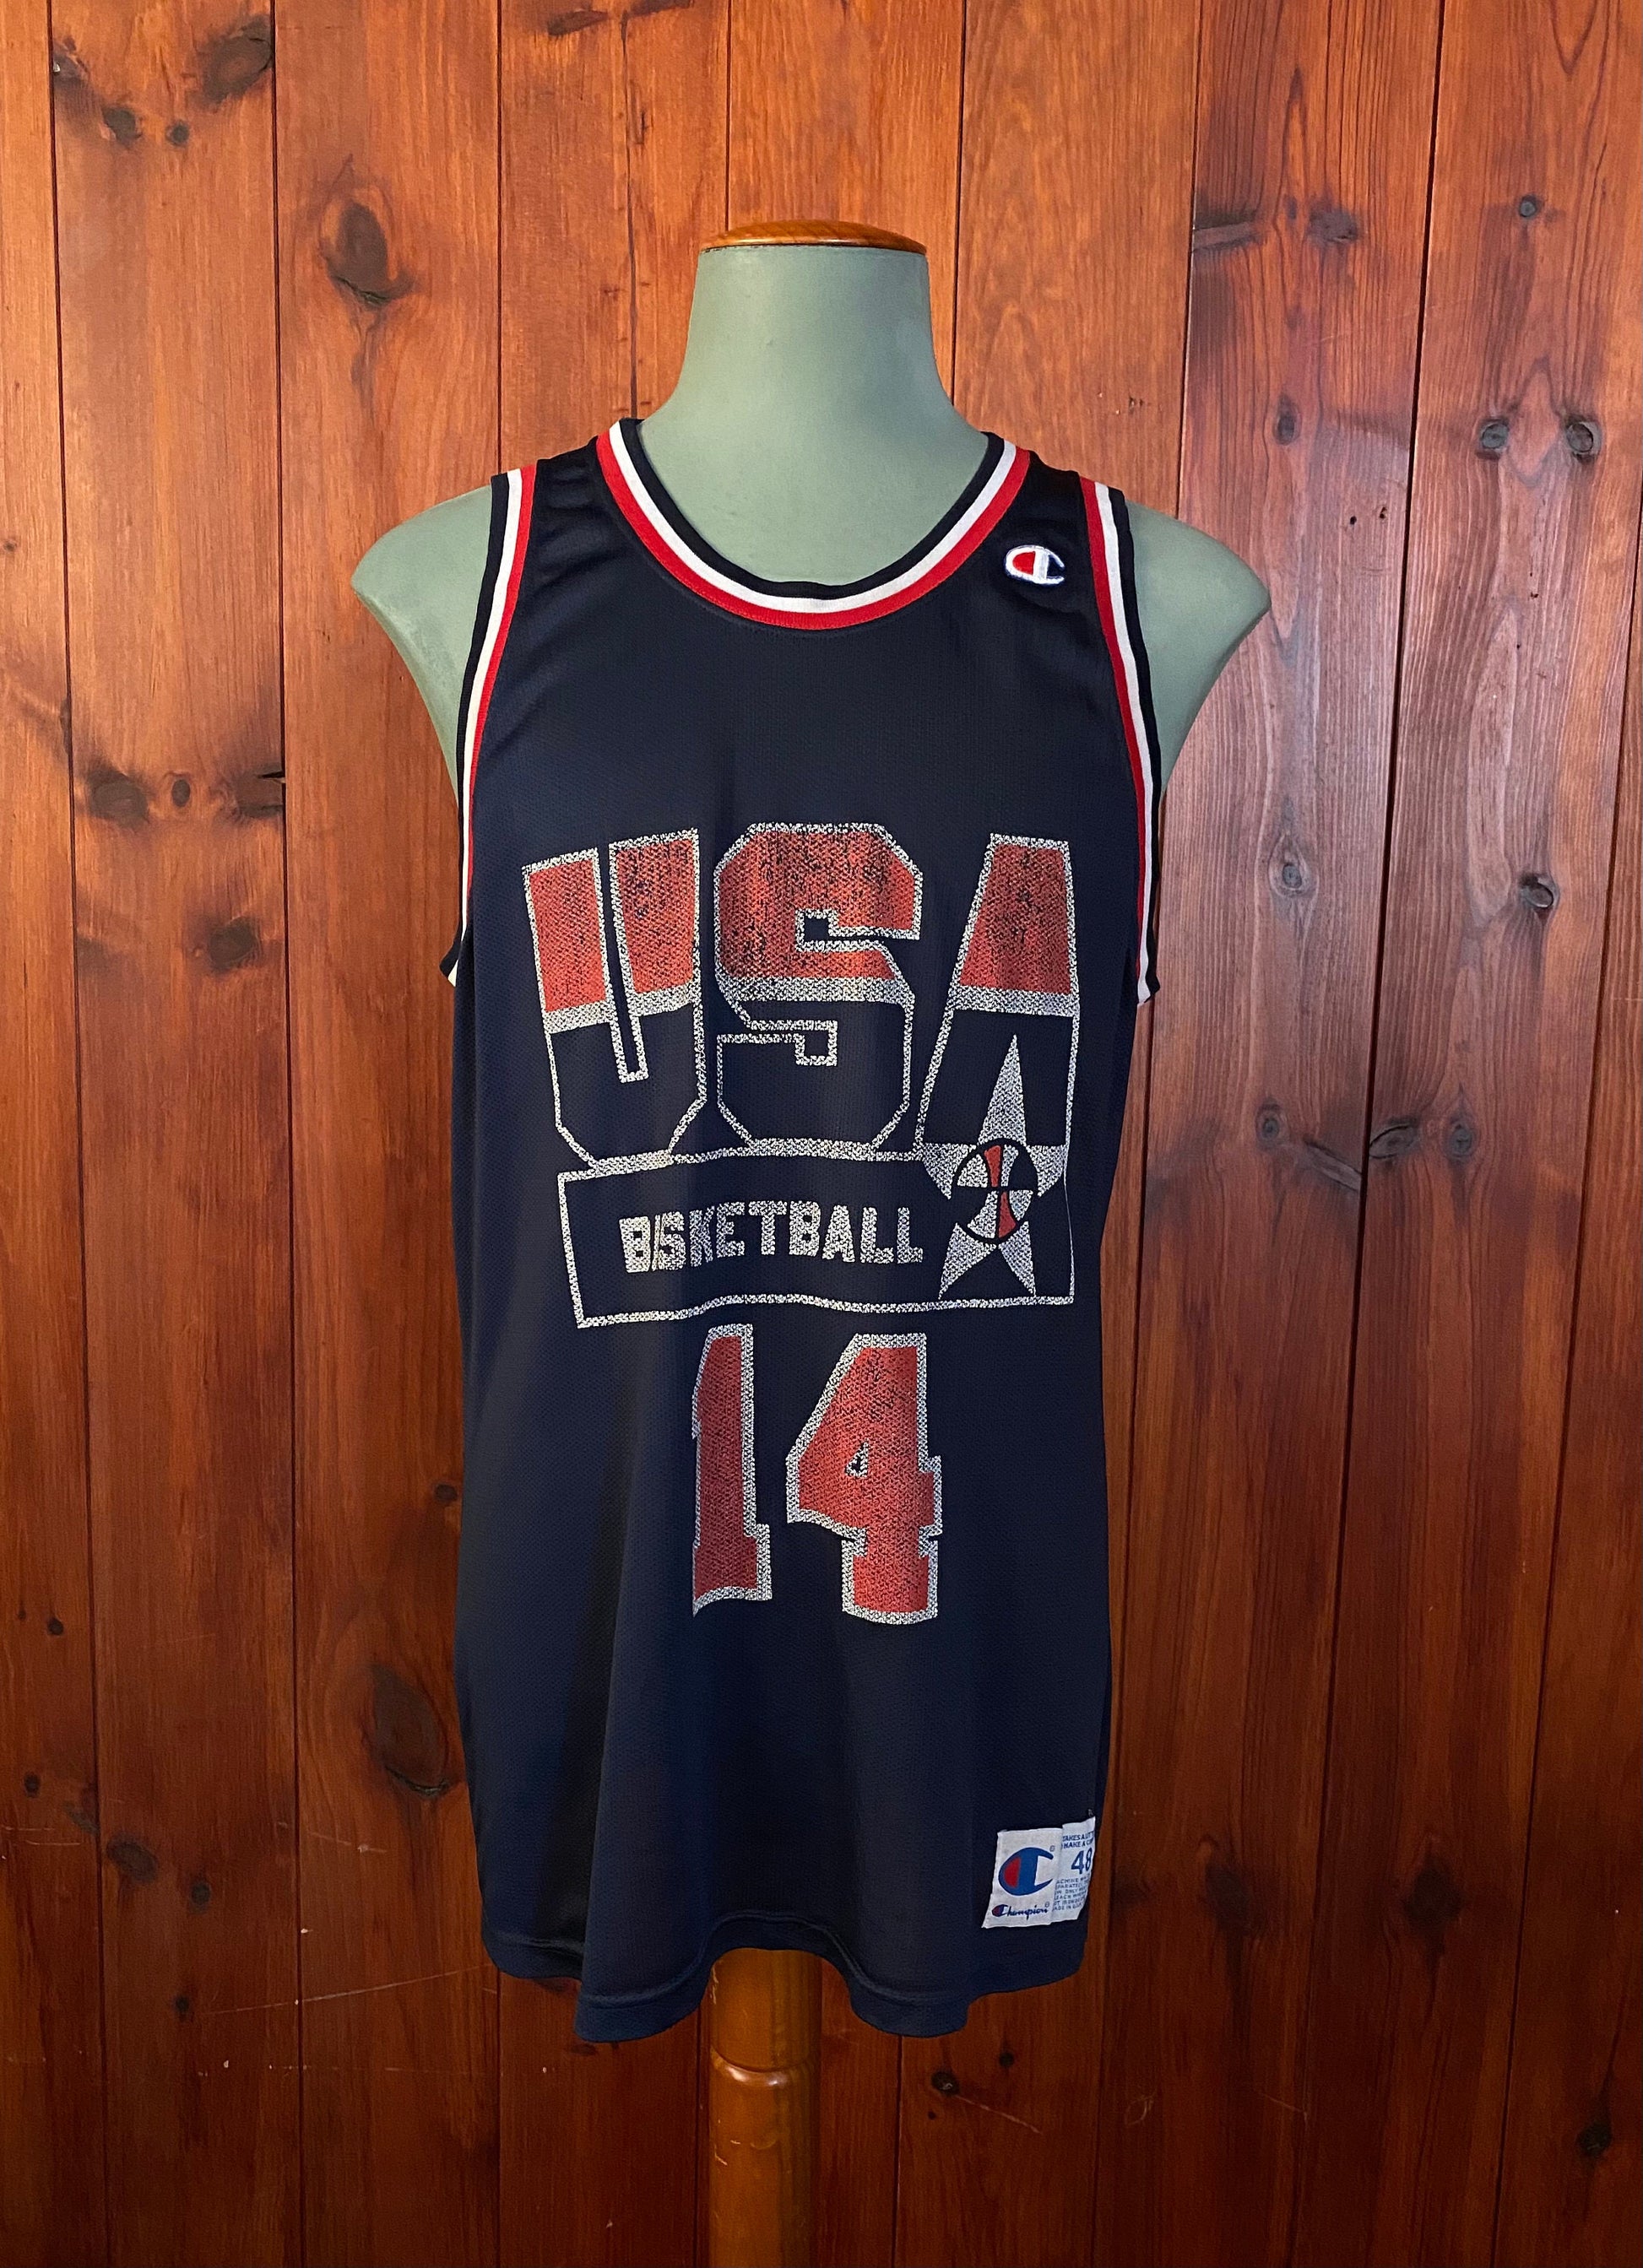 Vintage distressed 90s USA Team Champion NBA jersey with player Mourning #14, size 48 - front view.